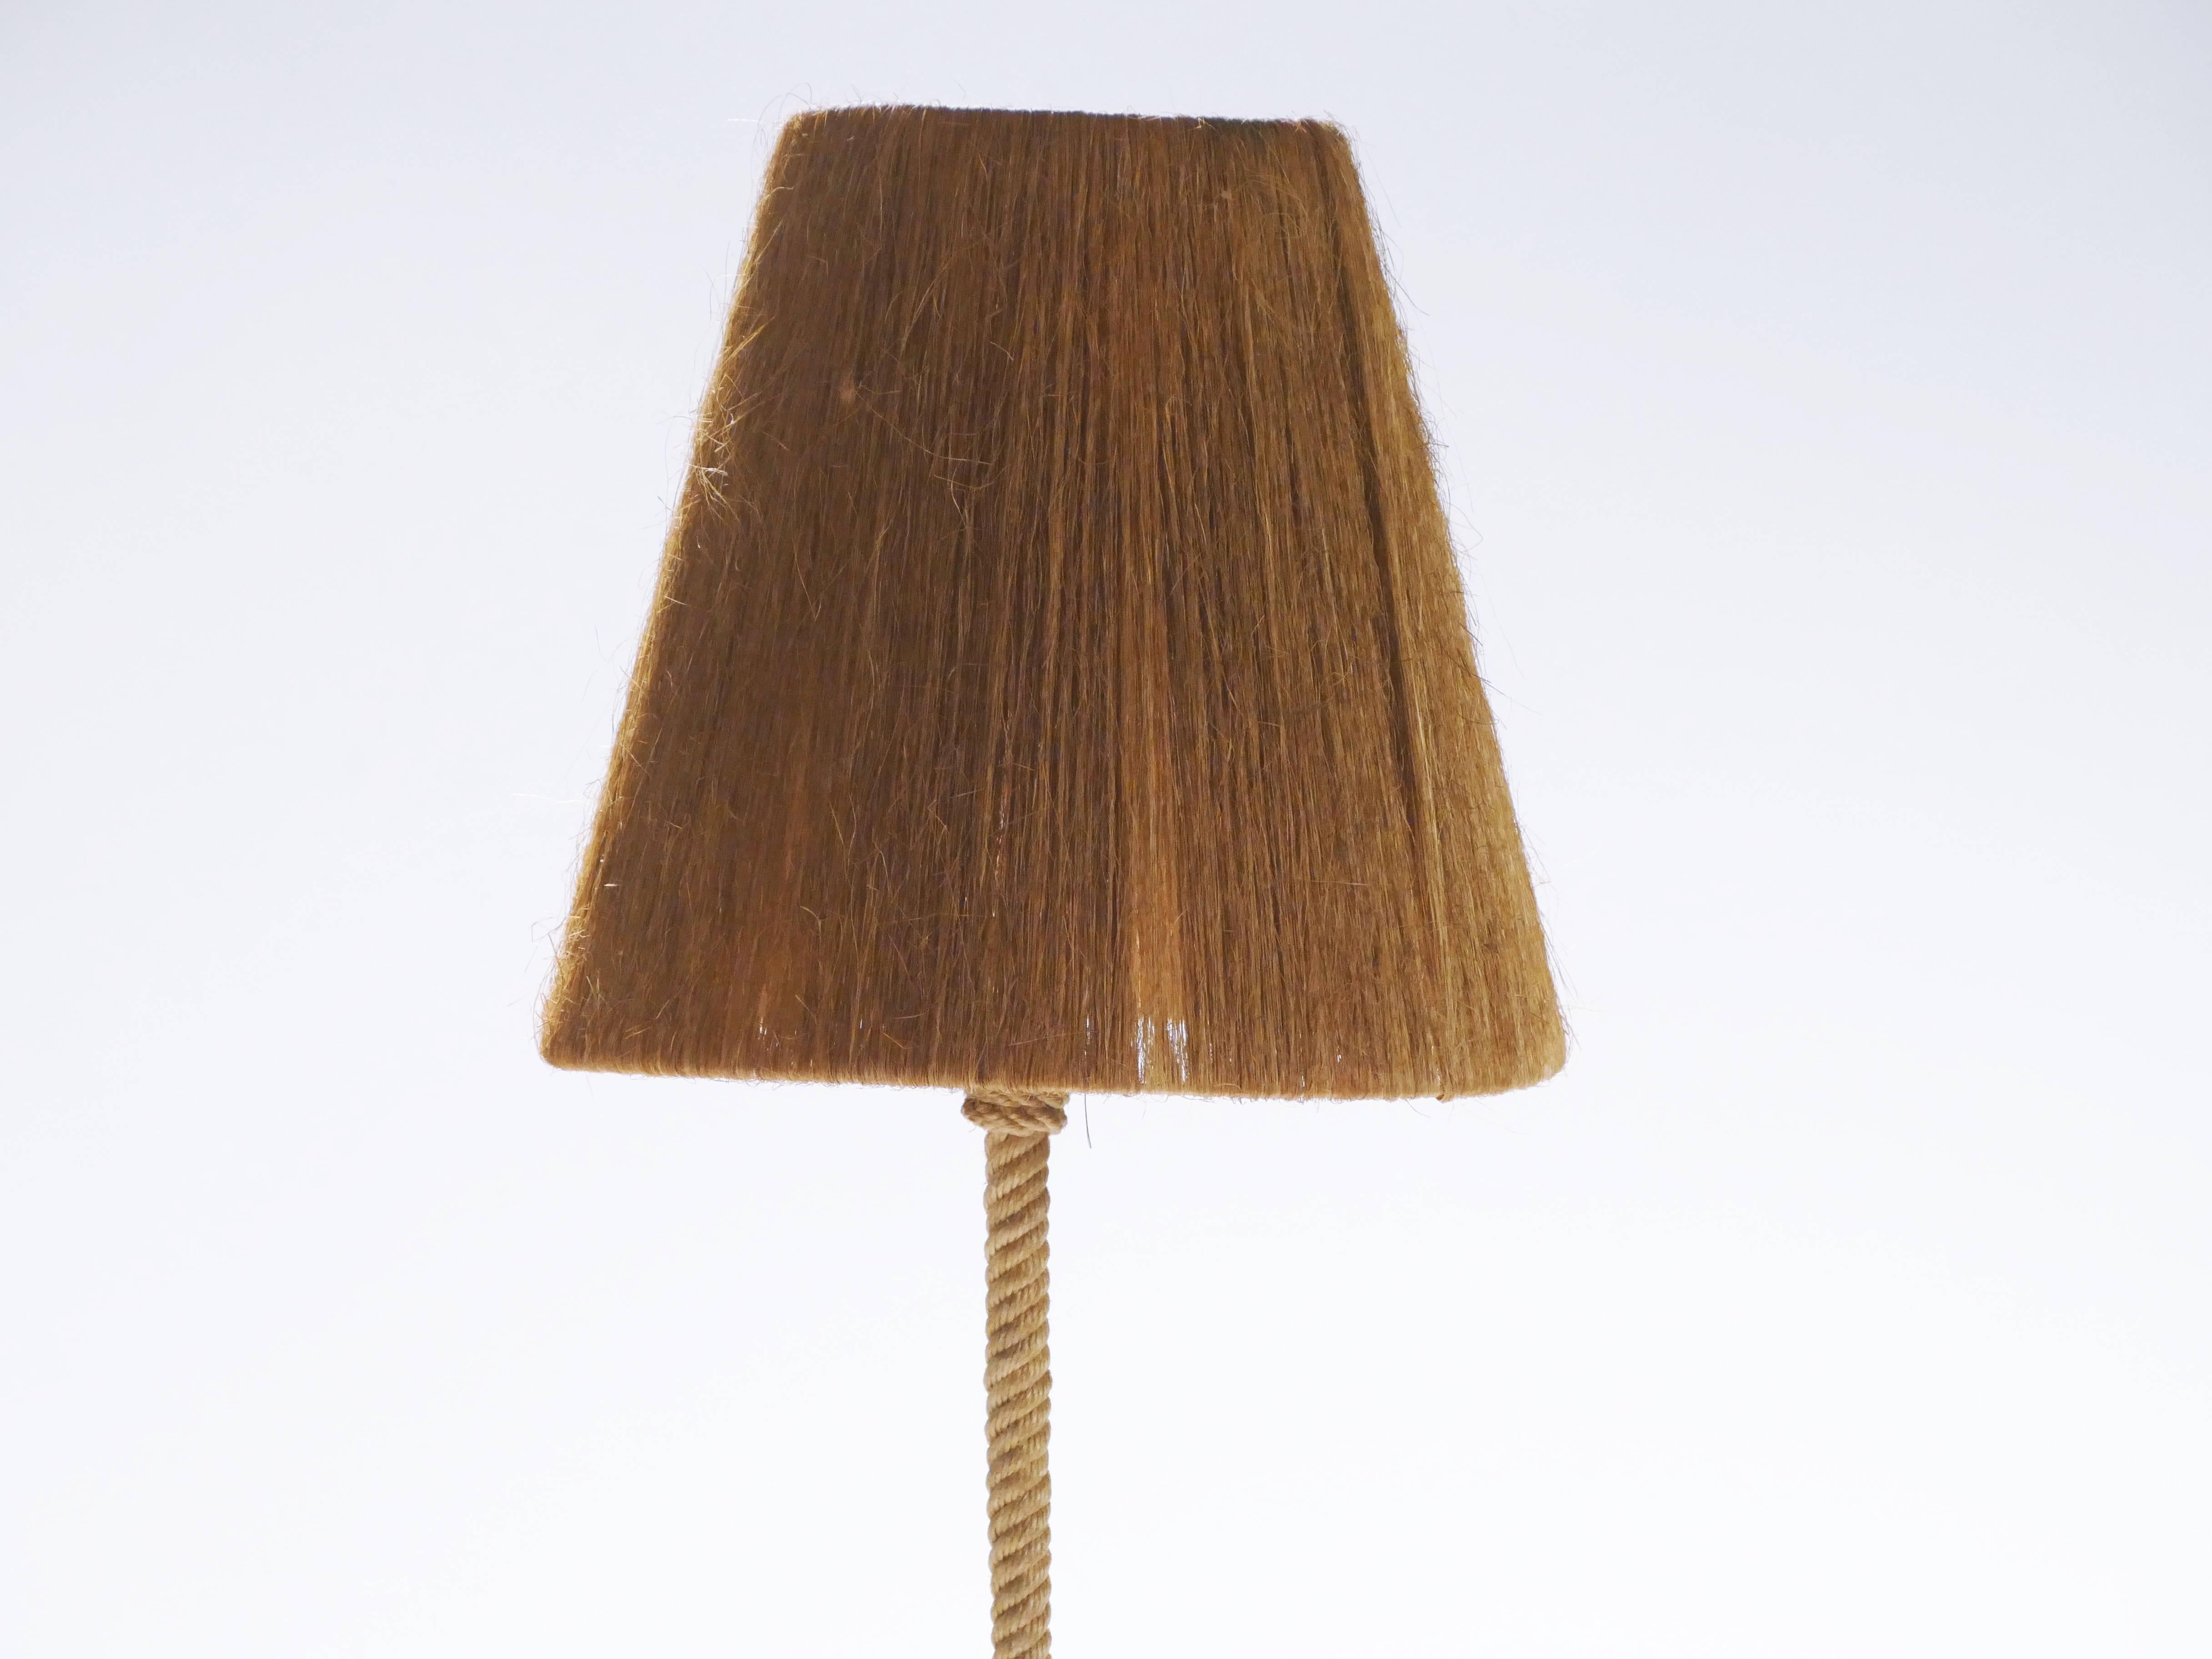 Nautical and natural elements are used in the construction of this vintage floor lamp from the 1960s. The rope feet and dark brown rope lampshade feel earthy and eclectic, and the feet’s wideset, arching structure adds complexity to the piece. A